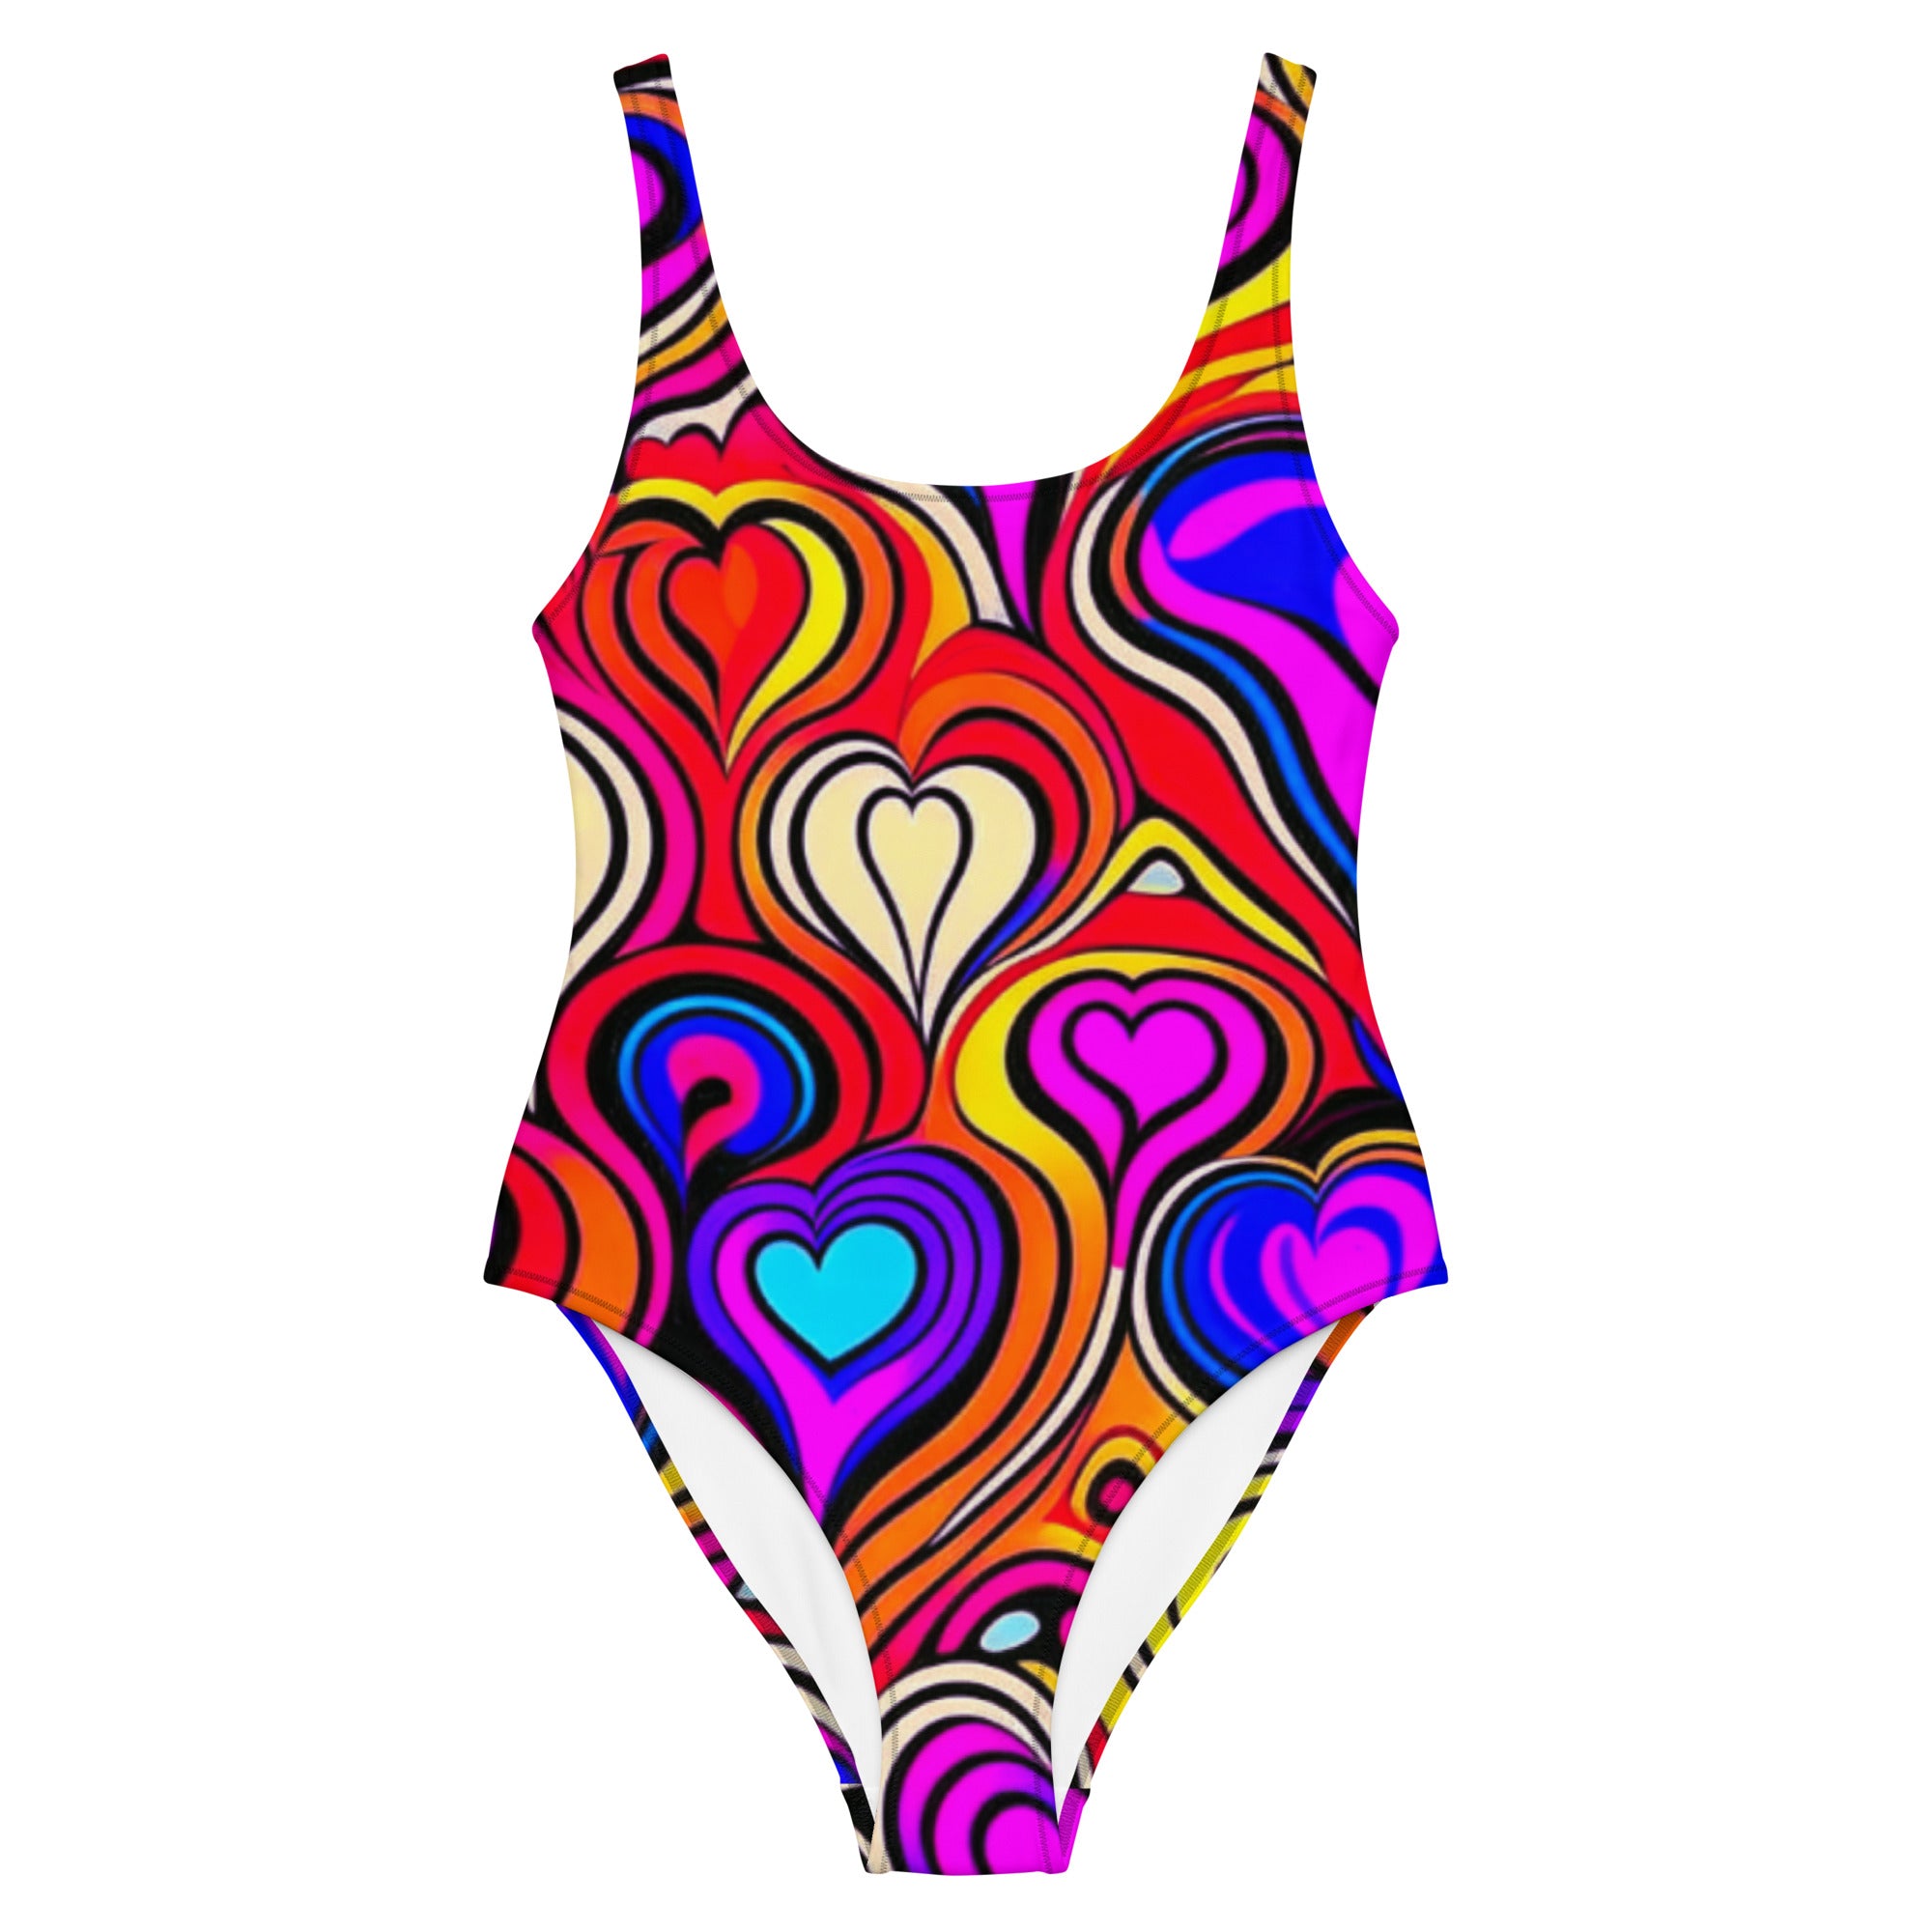 This multicolored rave bodysuit will have you dancing the night away in style. Featuring a vibrant design, this one-piece is perfect for any rave or music festival. With the Heartbeat Harmony Rave Bodysuit, you'll feel comfortable and confident all night long.